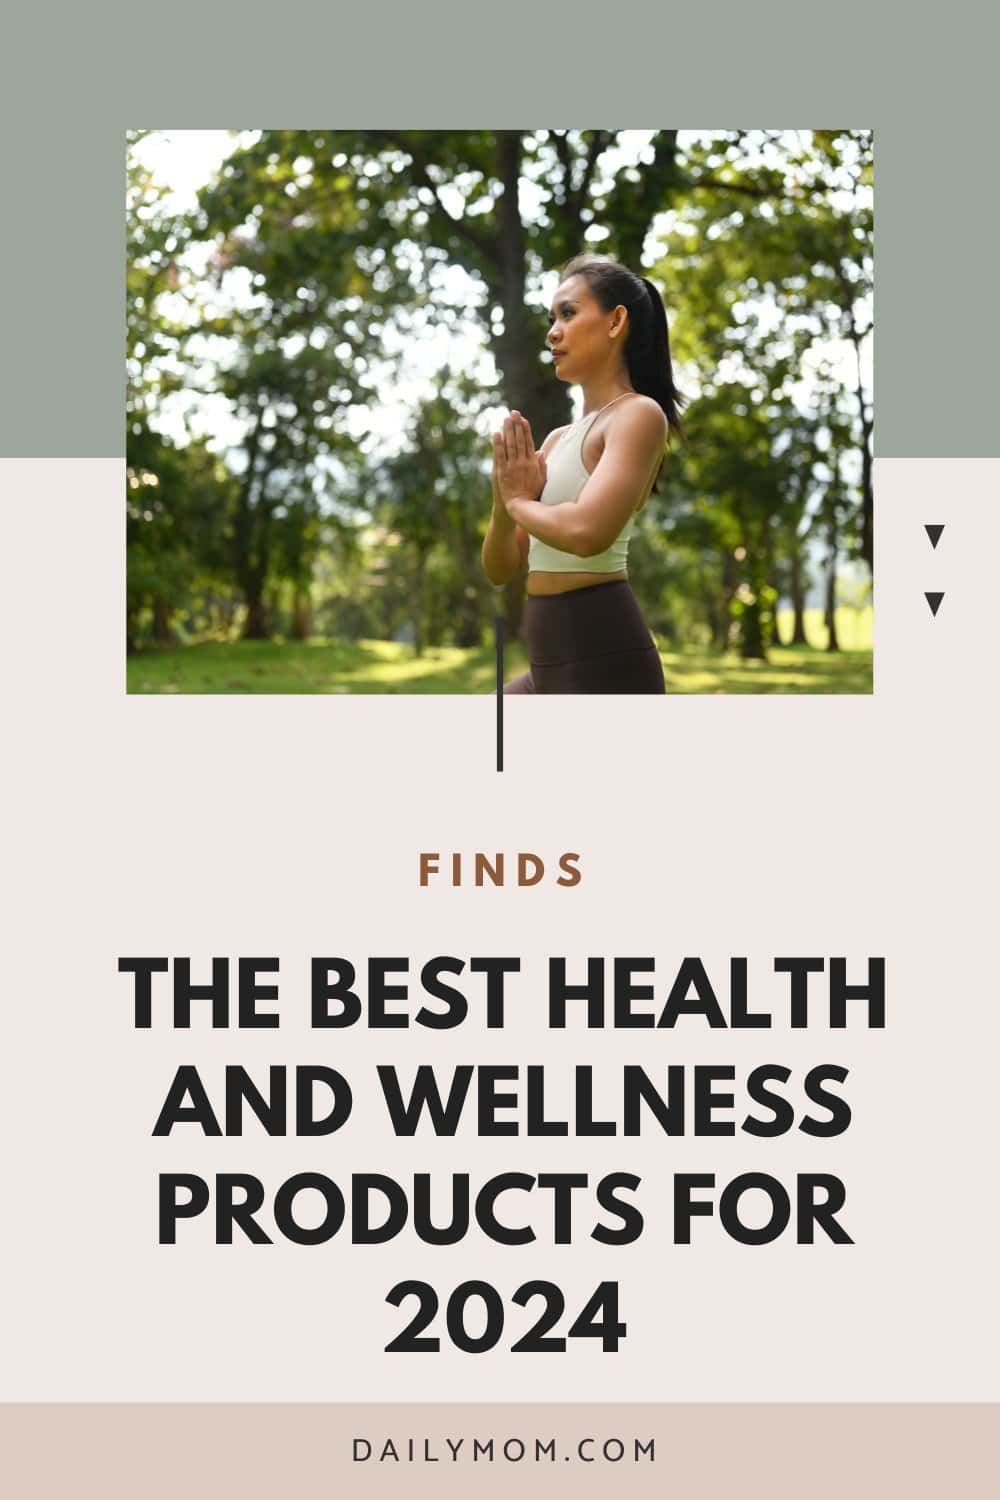 The Best Health And Wellness Products For 2024 66 Daily Mom, Magazine For Families